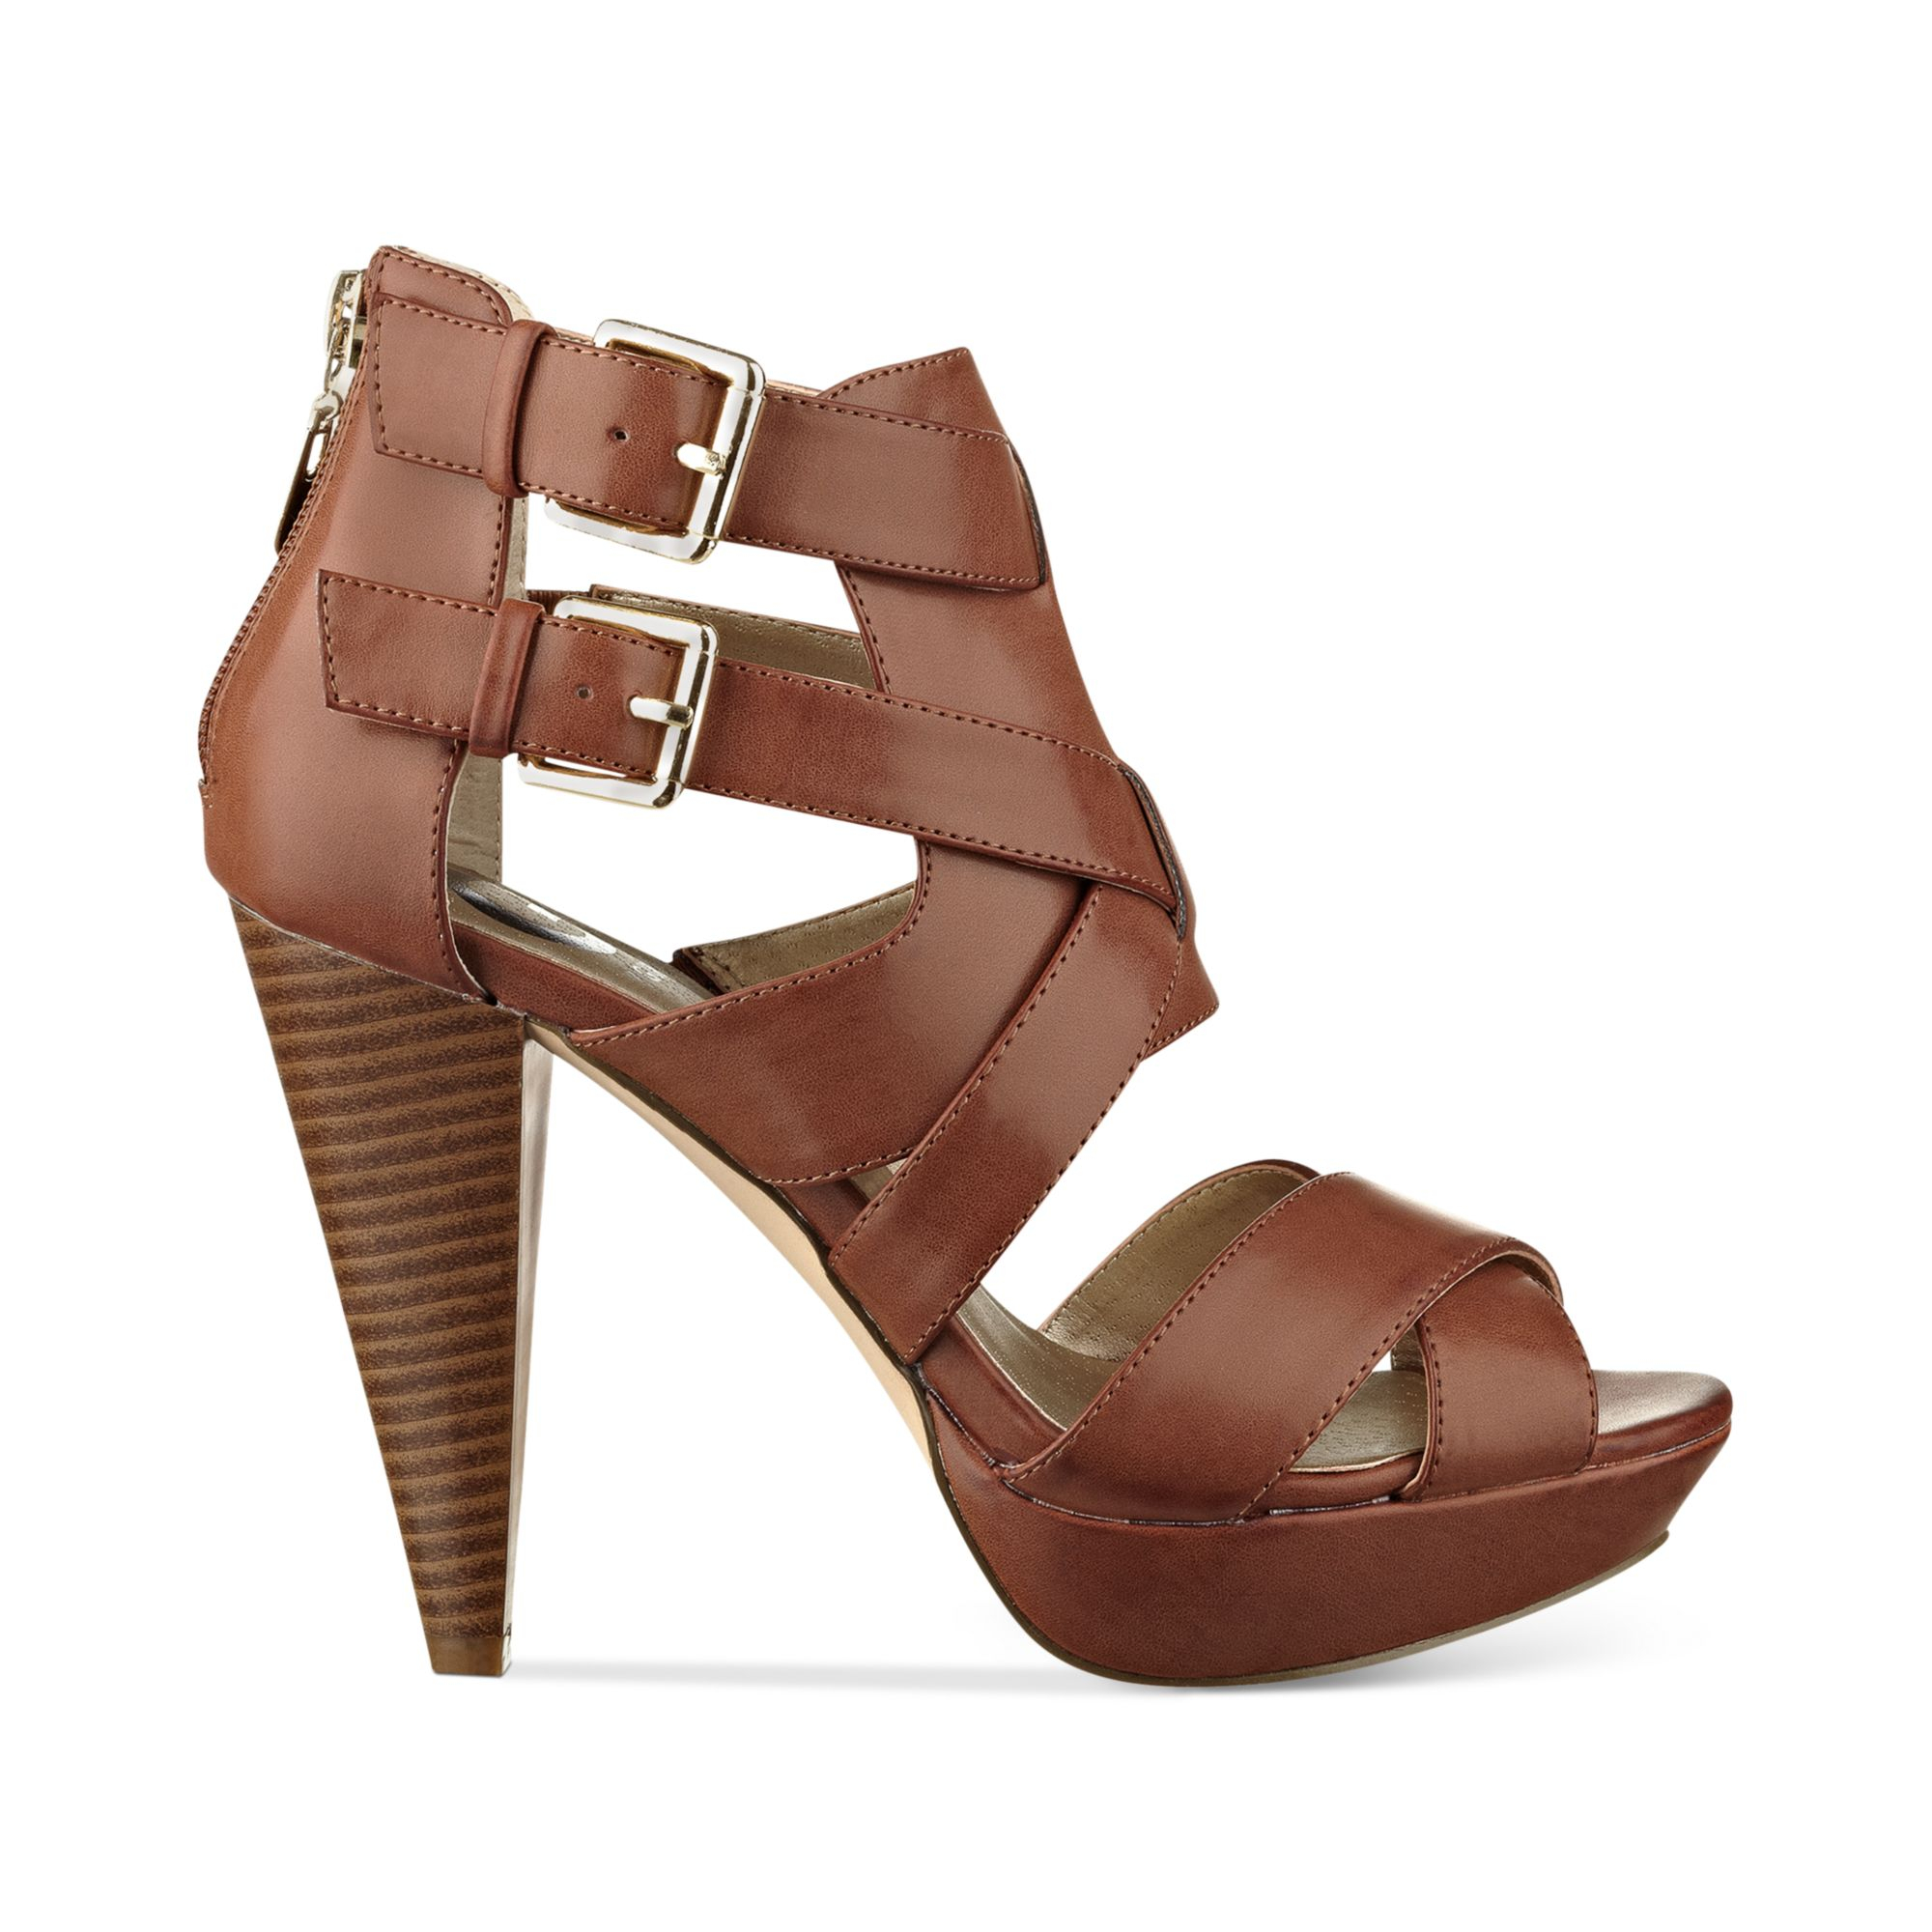 G by Guess Womens Dixie Platform Sandals in Brown - Lyst